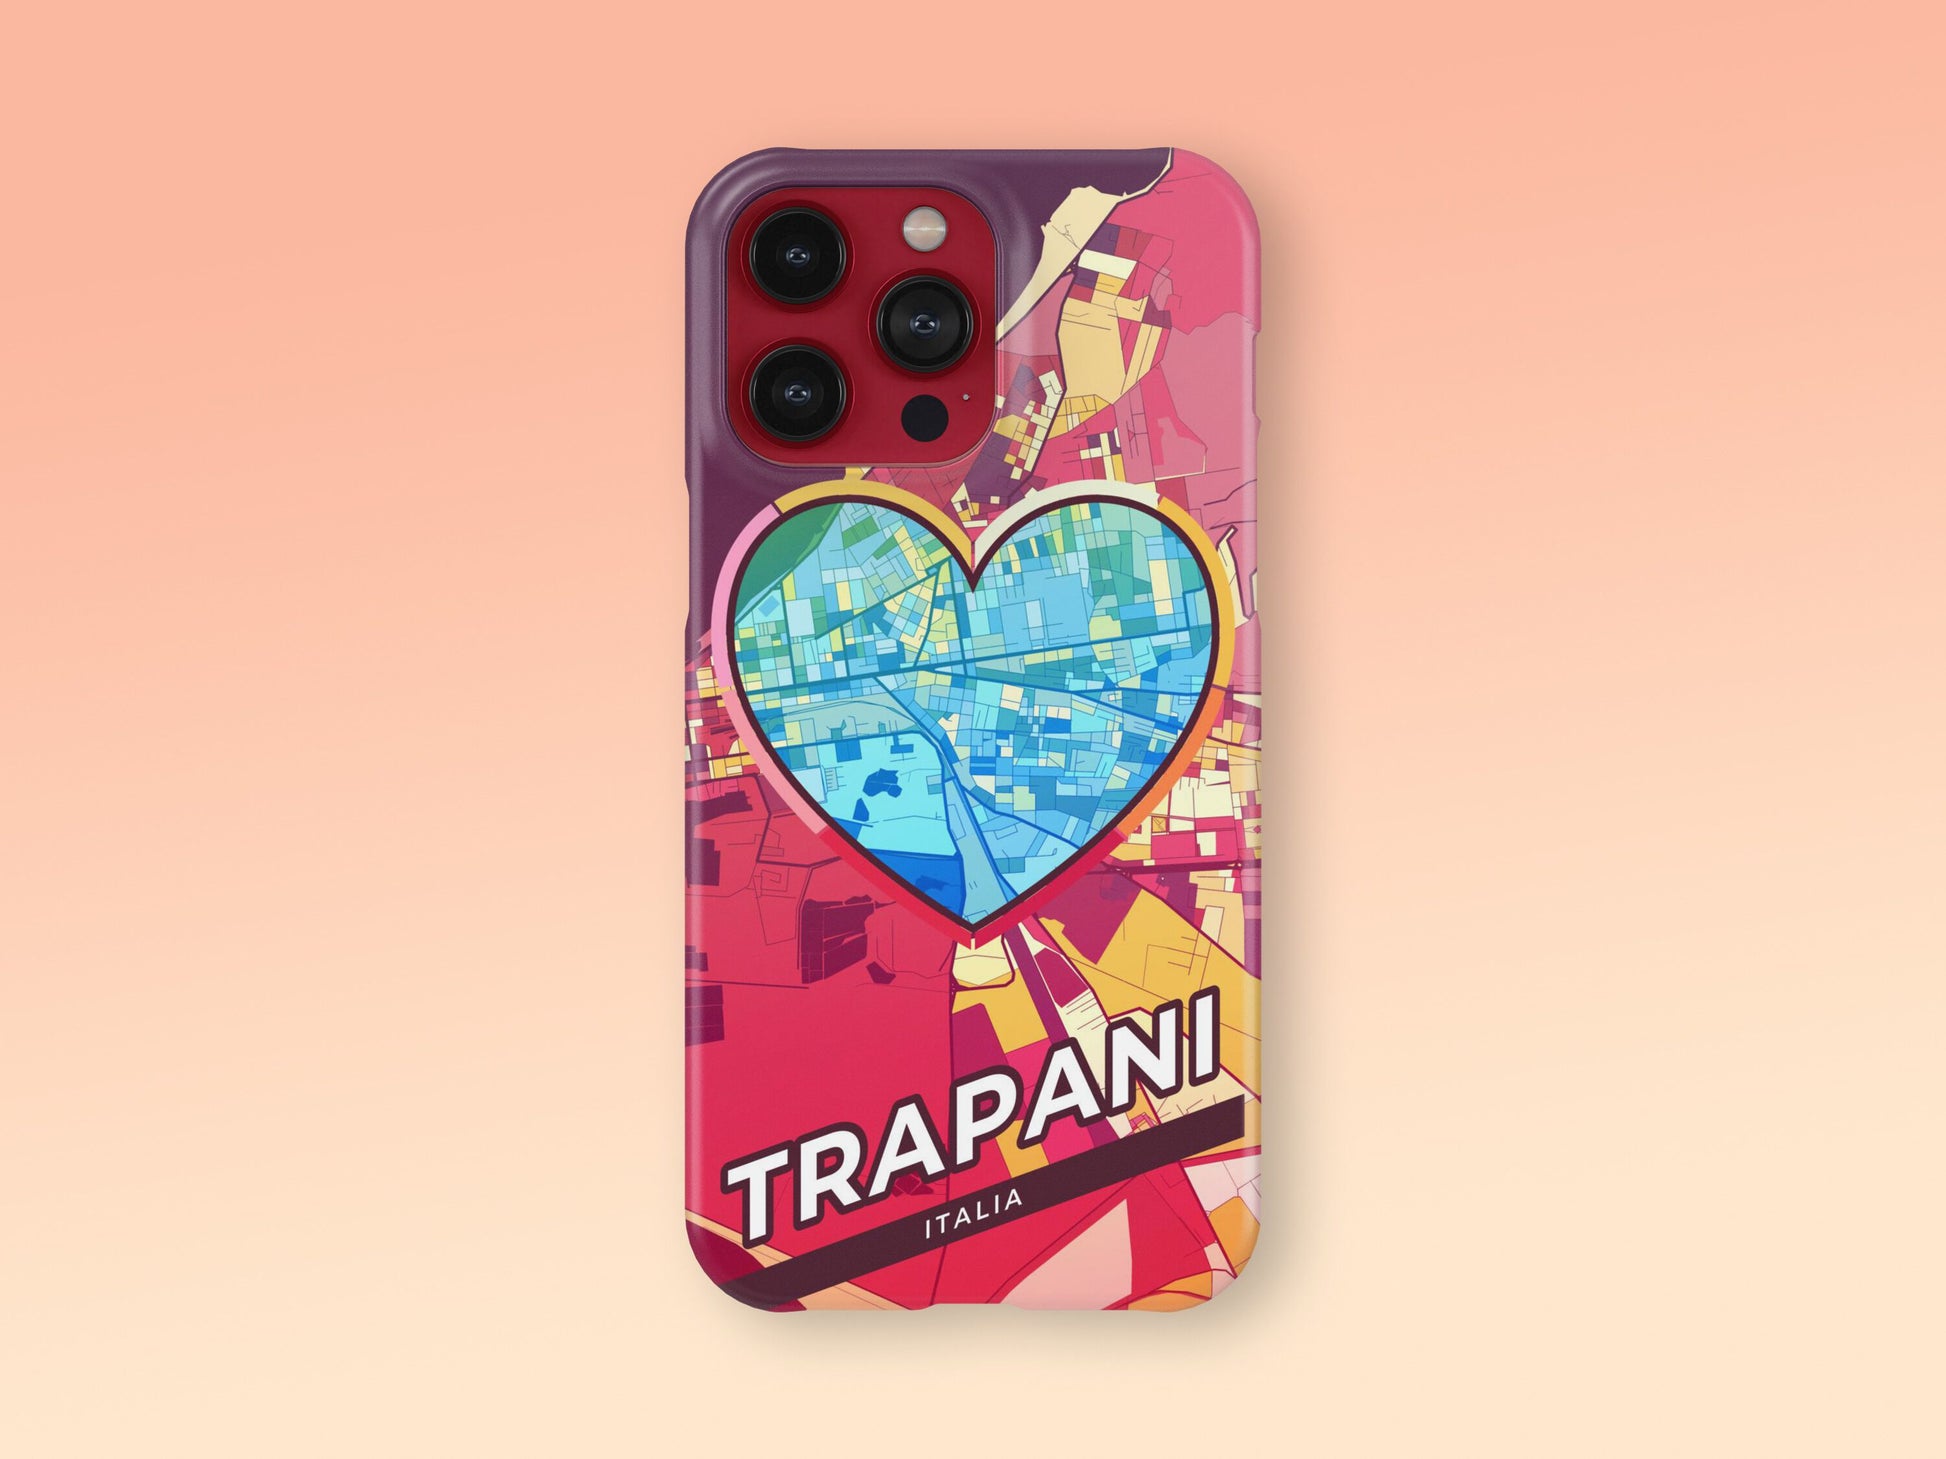 Trapani Italy slim phone case with colorful icon 2